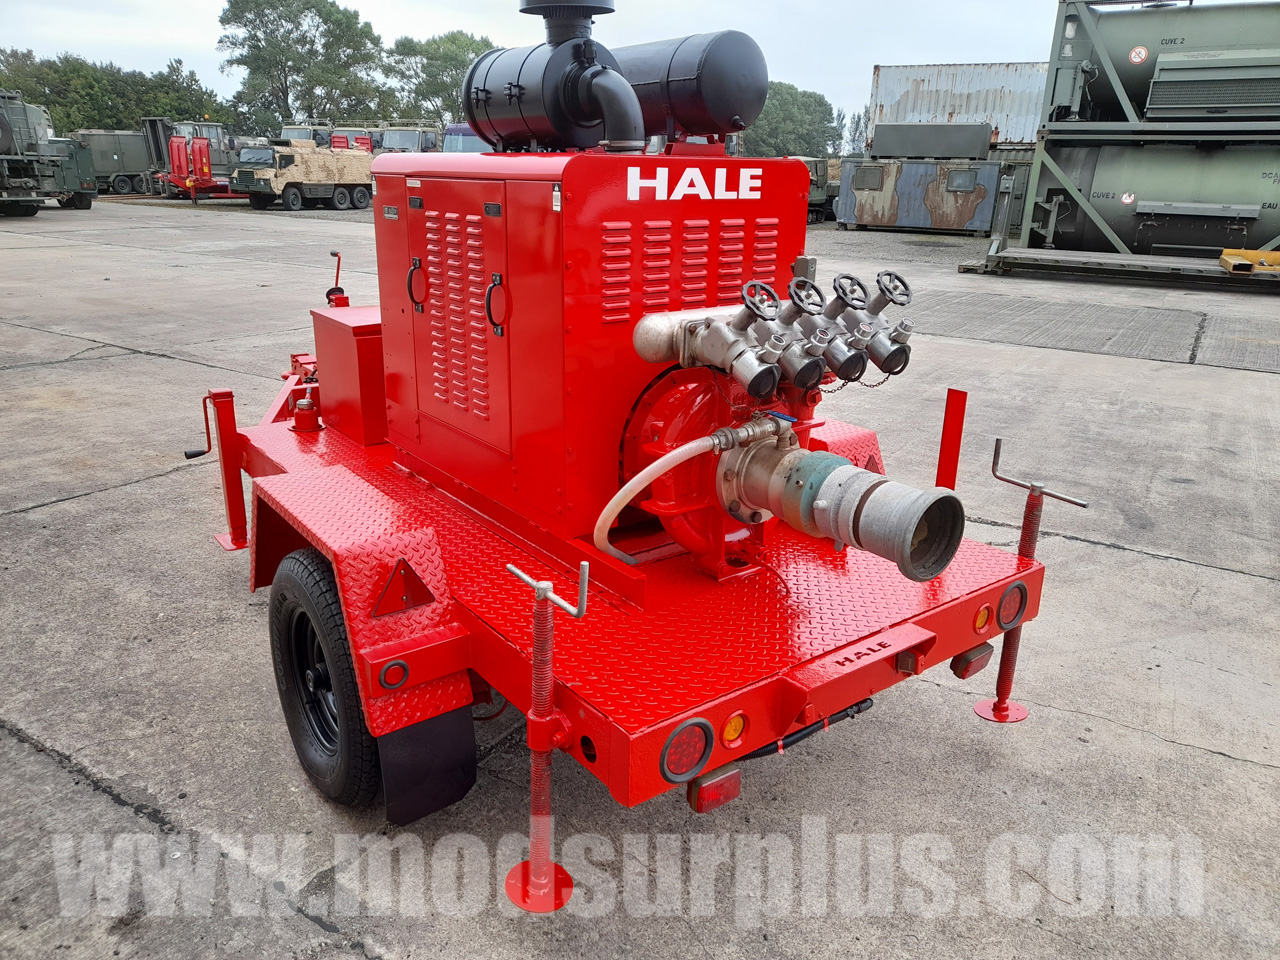 Hale Trailered High Capacity Fire Pump - ex military vehicles for sale, mod surplus